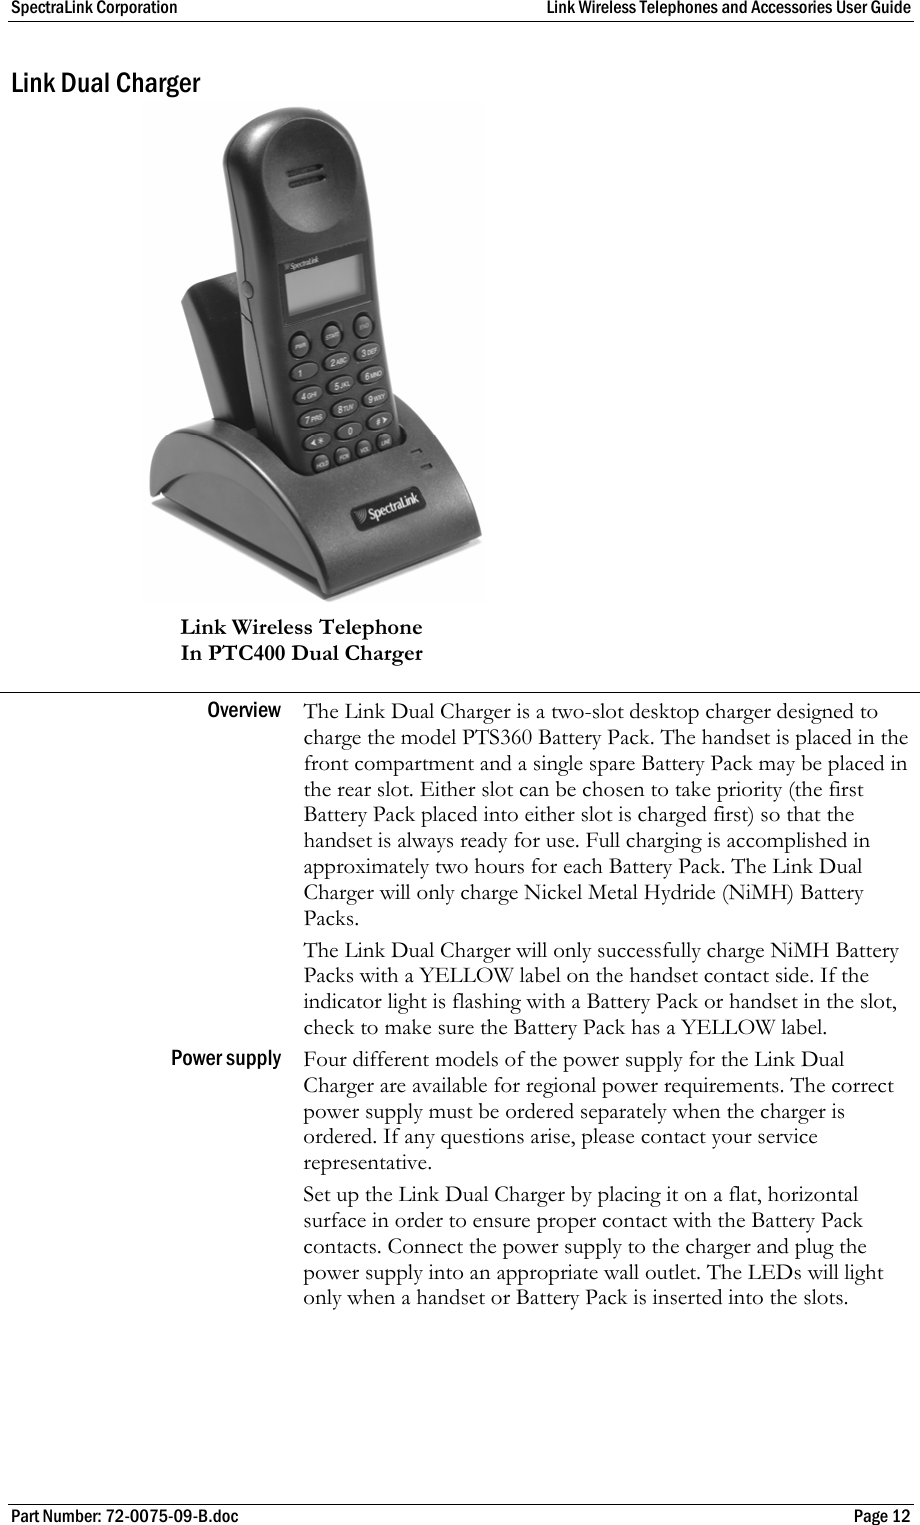 SpectraLink Corporation  Link Wireless Telephones and Accessories User Guide Part Number: 72-0075-09-B.doc  Page 12 Link Dual Charger  Link Wireless Telephone   In PTC400 Dual Charger Overview  The Link Dual Charger is a two-slot desktop charger designed to charge the model PTS360 Battery Pack. The handset is placed in the front compartment and a single spare Battery Pack may be placed in the rear slot. Either slot can be chosen to take priority (the first Battery Pack placed into either slot is charged first) so that the handset is always ready for use. Full charging is accomplished in approximately two hours for each Battery Pack. The Link Dual Charger will only charge Nickel Metal Hydride (NiMH) Battery Packs.  The Link Dual Charger will only successfully charge NiMH Battery Packs with a YELLOW label on the handset contact side. If the indicator light is flashing with a Battery Pack or handset in the slot, check to make sure the Battery Pack has a YELLOW label. Power supply  Four different models of the power supply for the Link Dual Charger are available for regional power requirements. The correct power supply must be ordered separately when the charger is ordered. If any questions arise, please contact your service representative.  Set up the Link Dual Charger by placing it on a flat, horizontal surface in order to ensure proper contact with the Battery Pack contacts. Connect the power supply to the charger and plug the power supply into an appropriate wall outlet. The LEDs will light only when a handset or Battery Pack is inserted into the slots. 